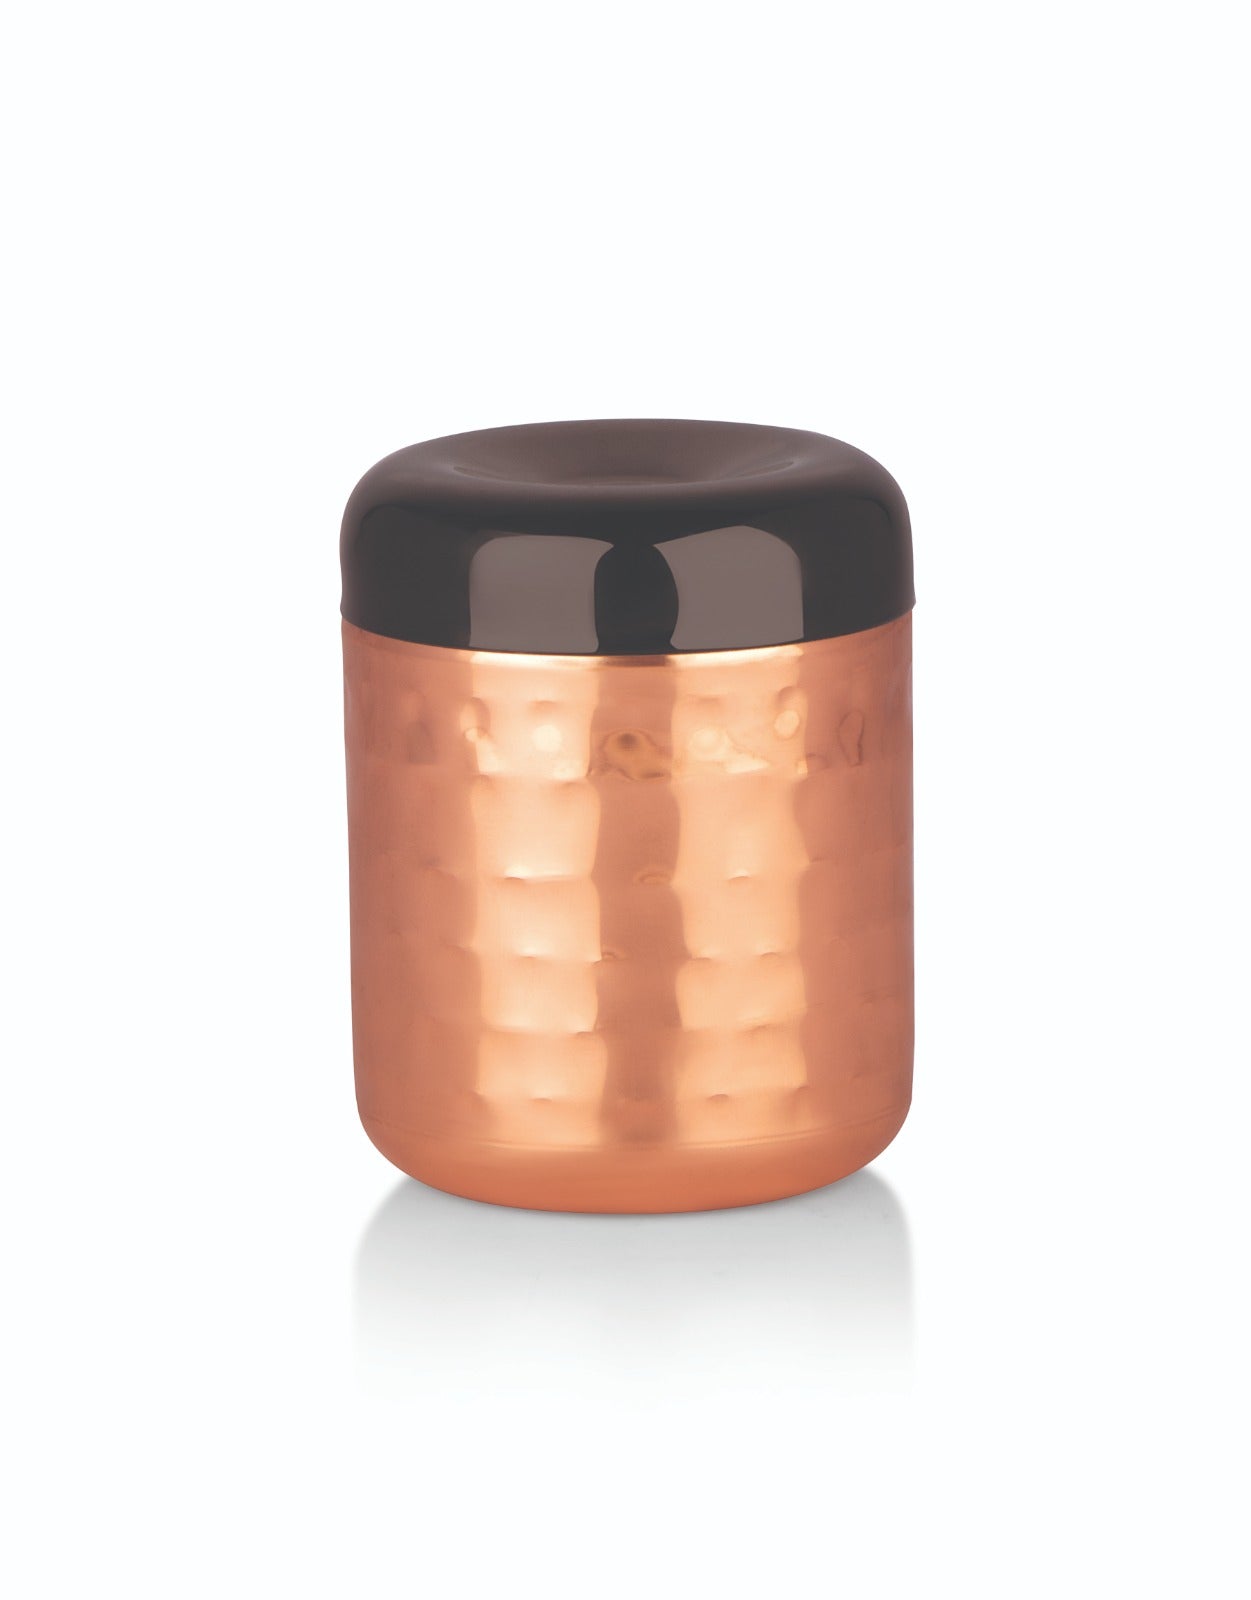 NATULIX Heavy Gauge Copper Coated Stainless Steel Containers - Pack of 3 (320ml, 500ml, 650ml)